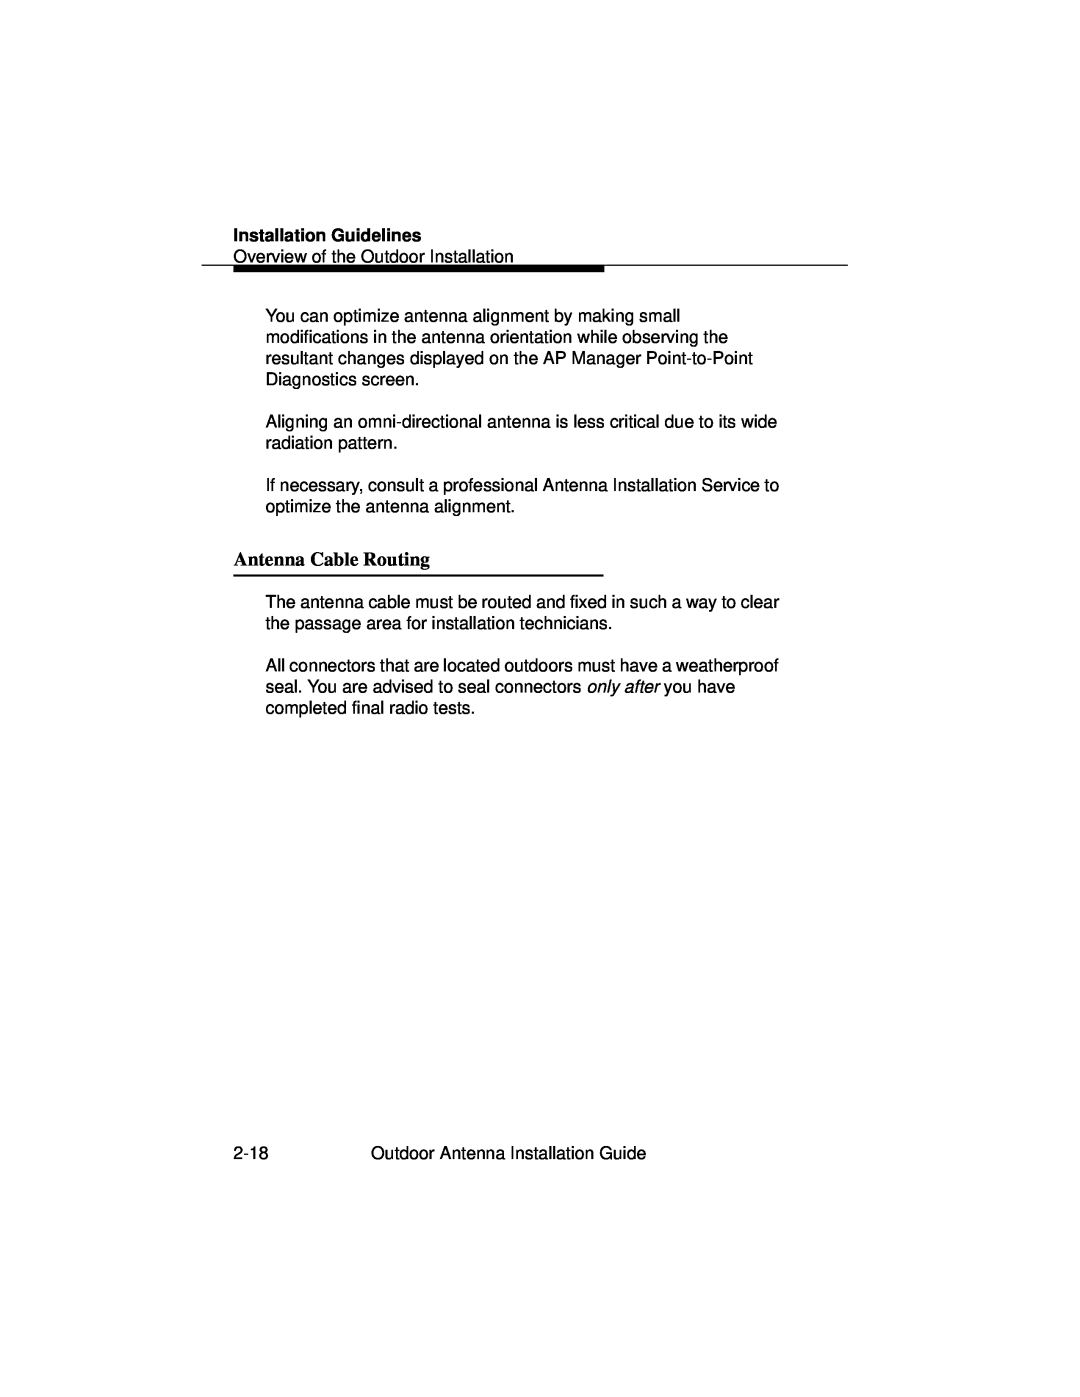 Cabletron Systems 9033073 manual Antenna Cable Routing, Installation Guidelines 